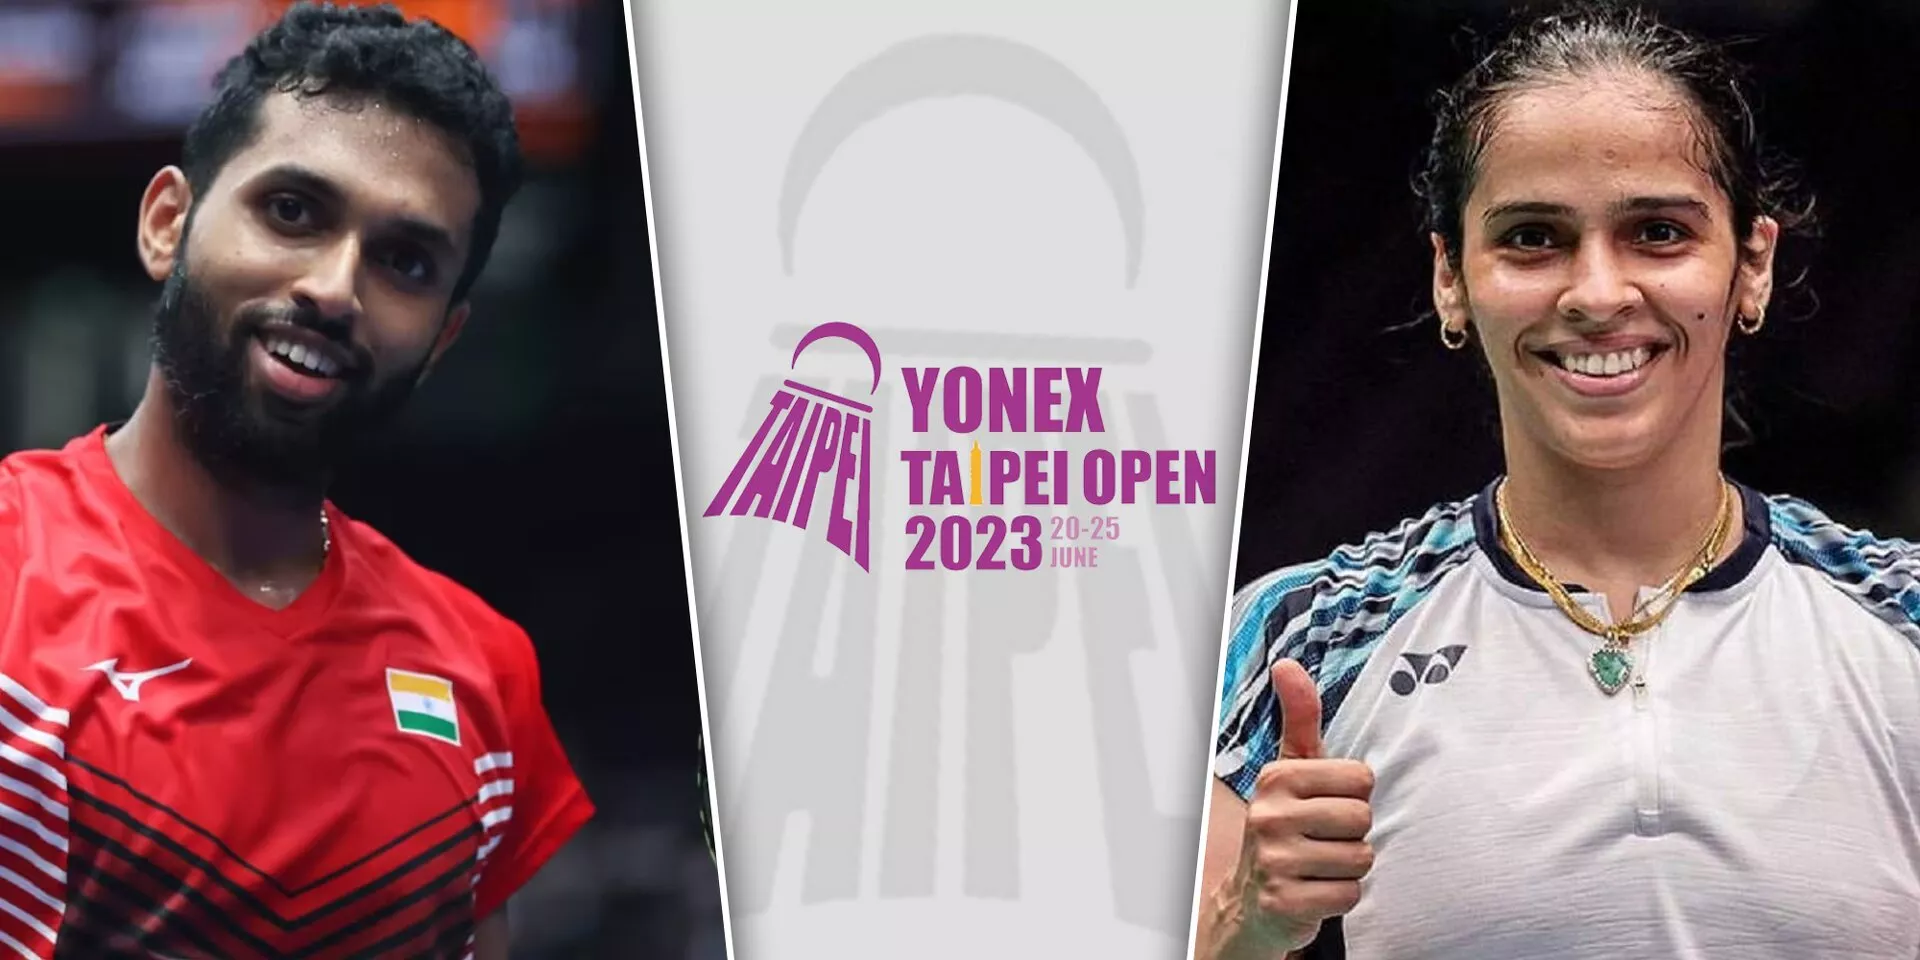 Taipei Open 2023 Updated Schedule, fixtures, results and live streaming details